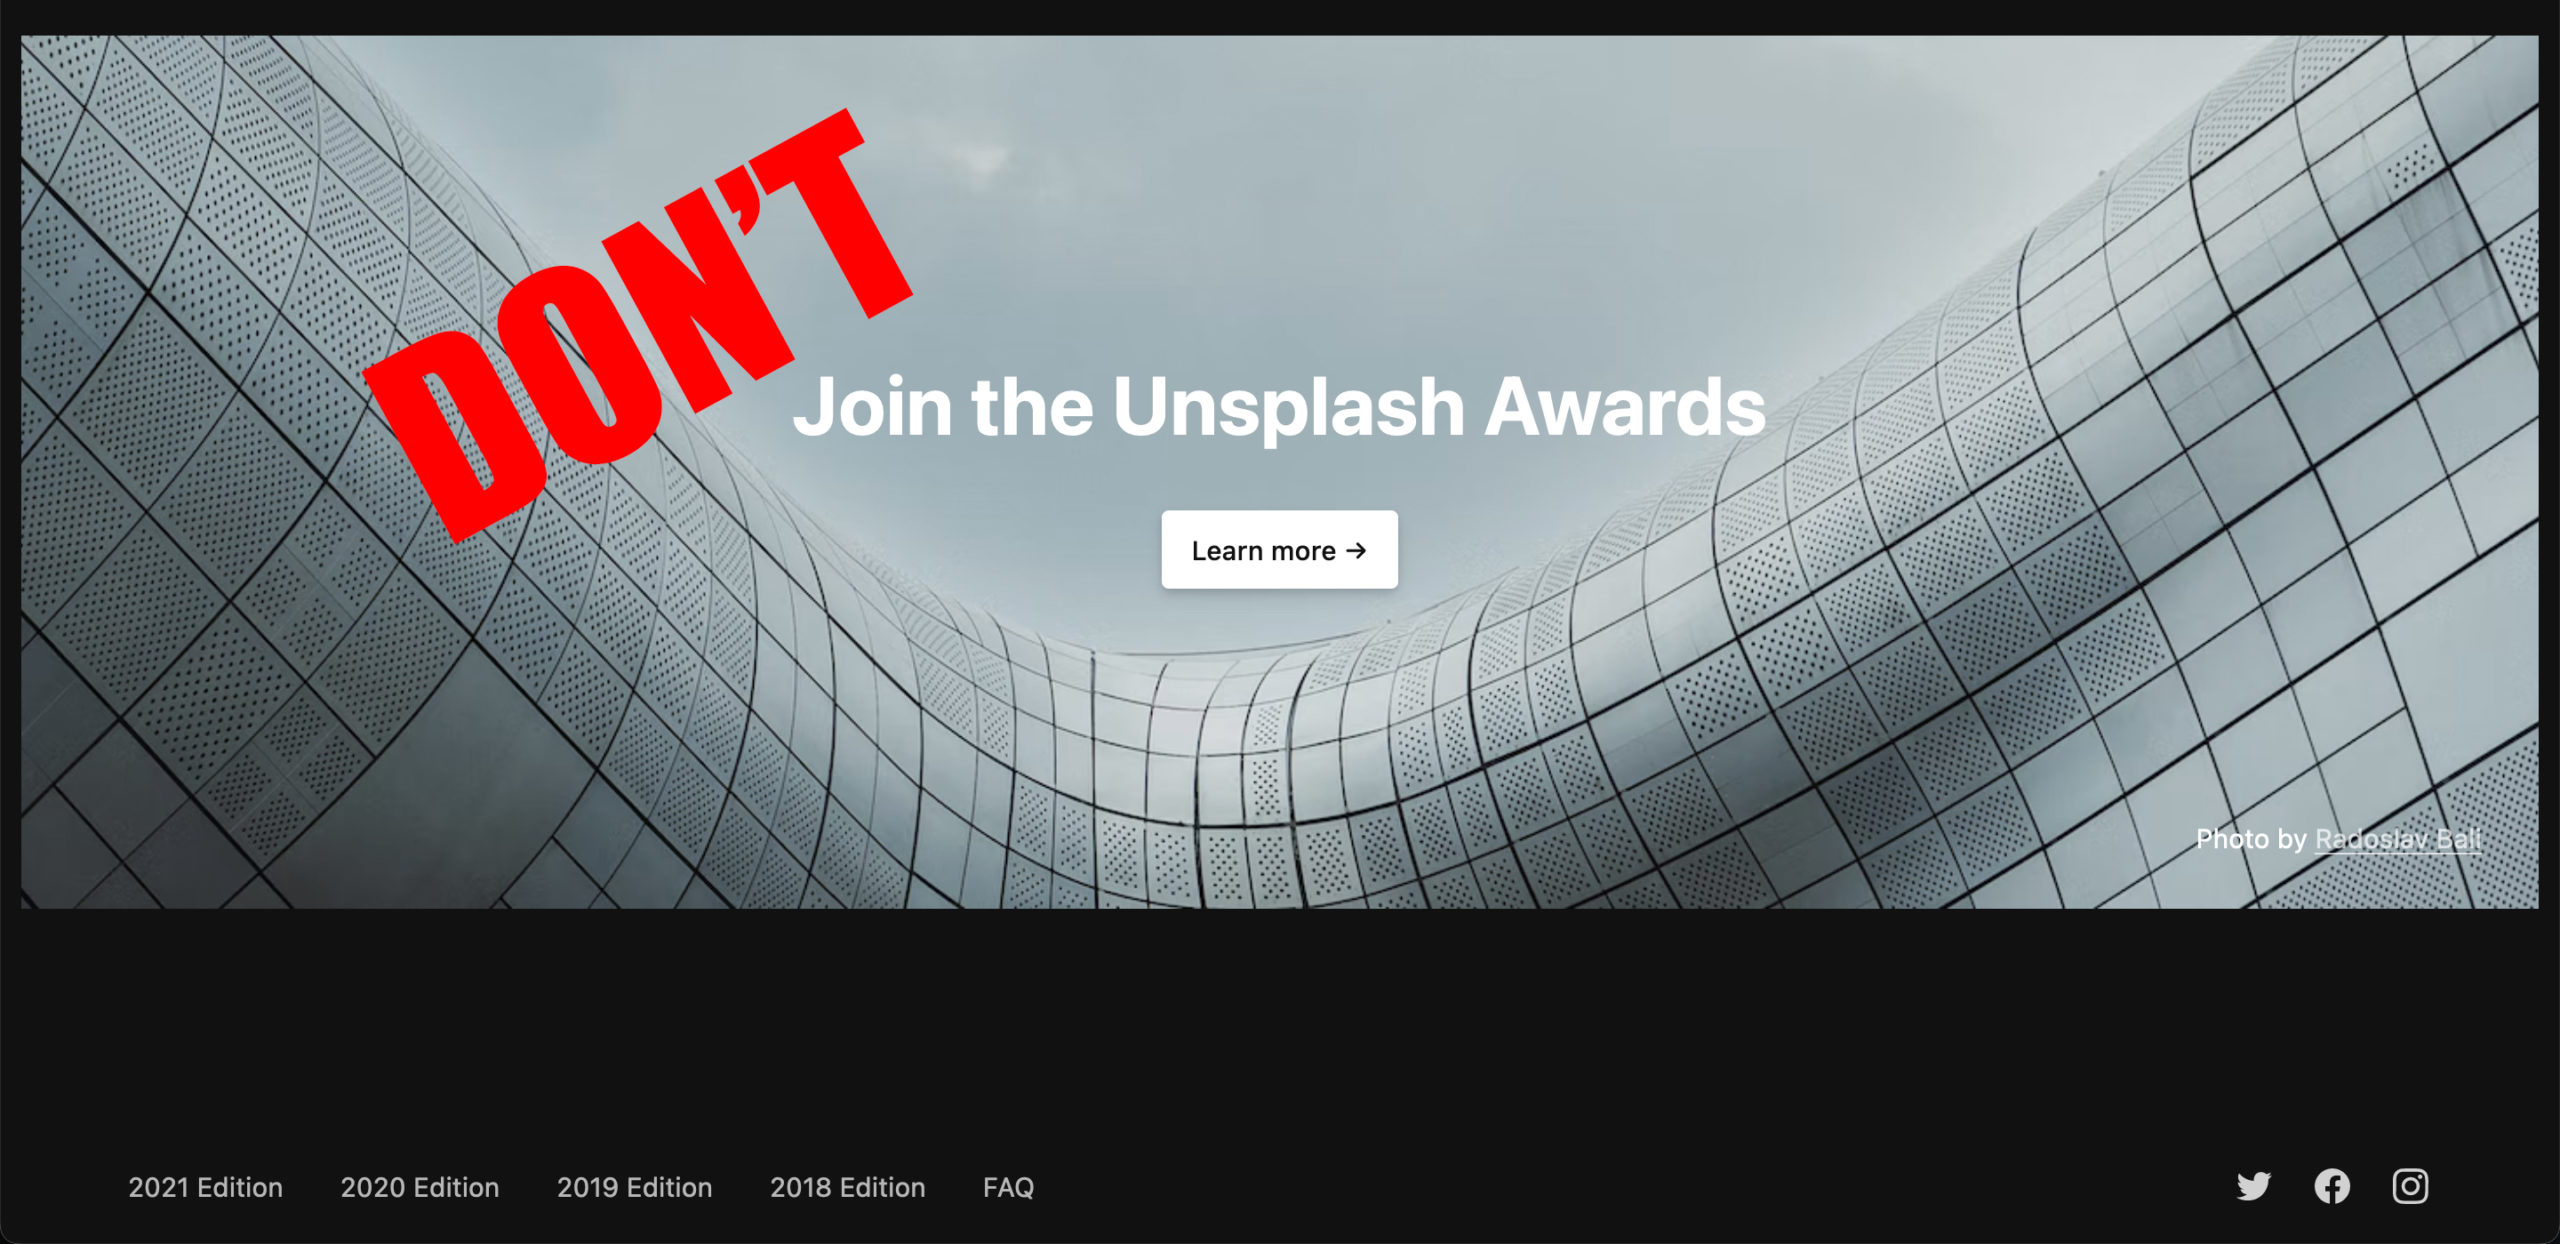 Demeaning Photographers Once more Is the sixth Unsplash Awards